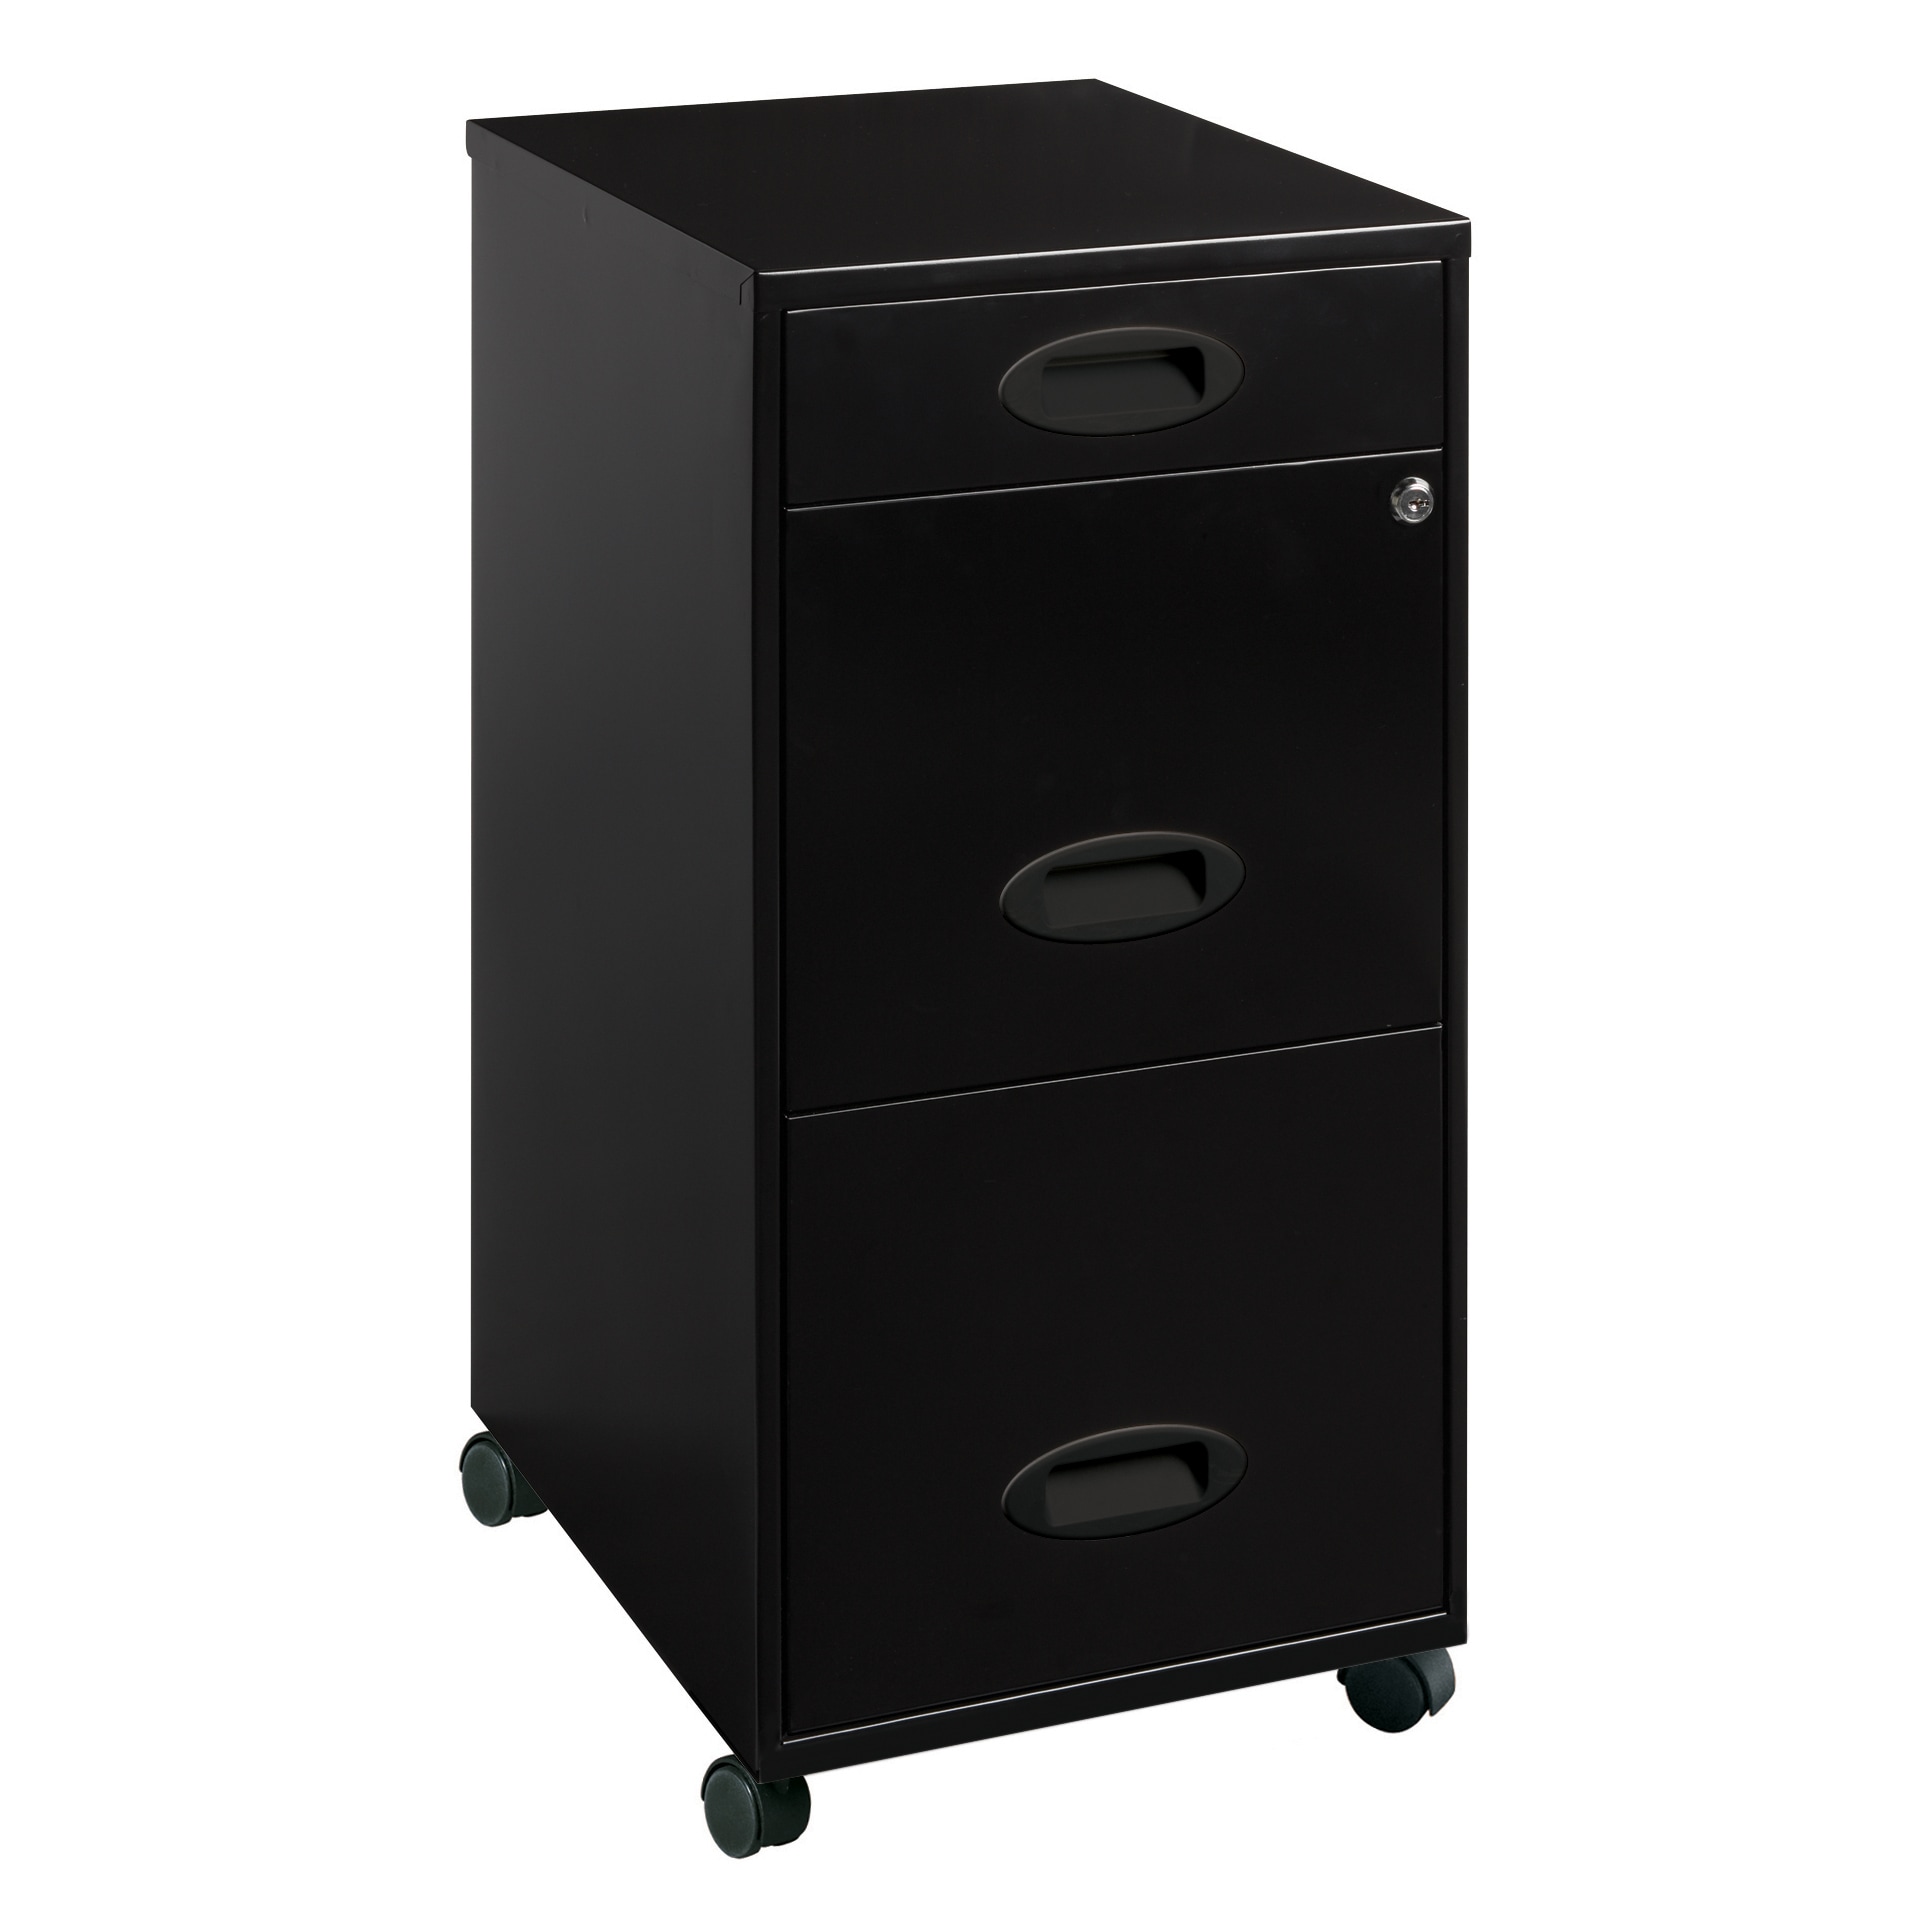 Shop Space Solutions Black 3 Drawer Mobile File Cabinet On Sale Overstock 5853287